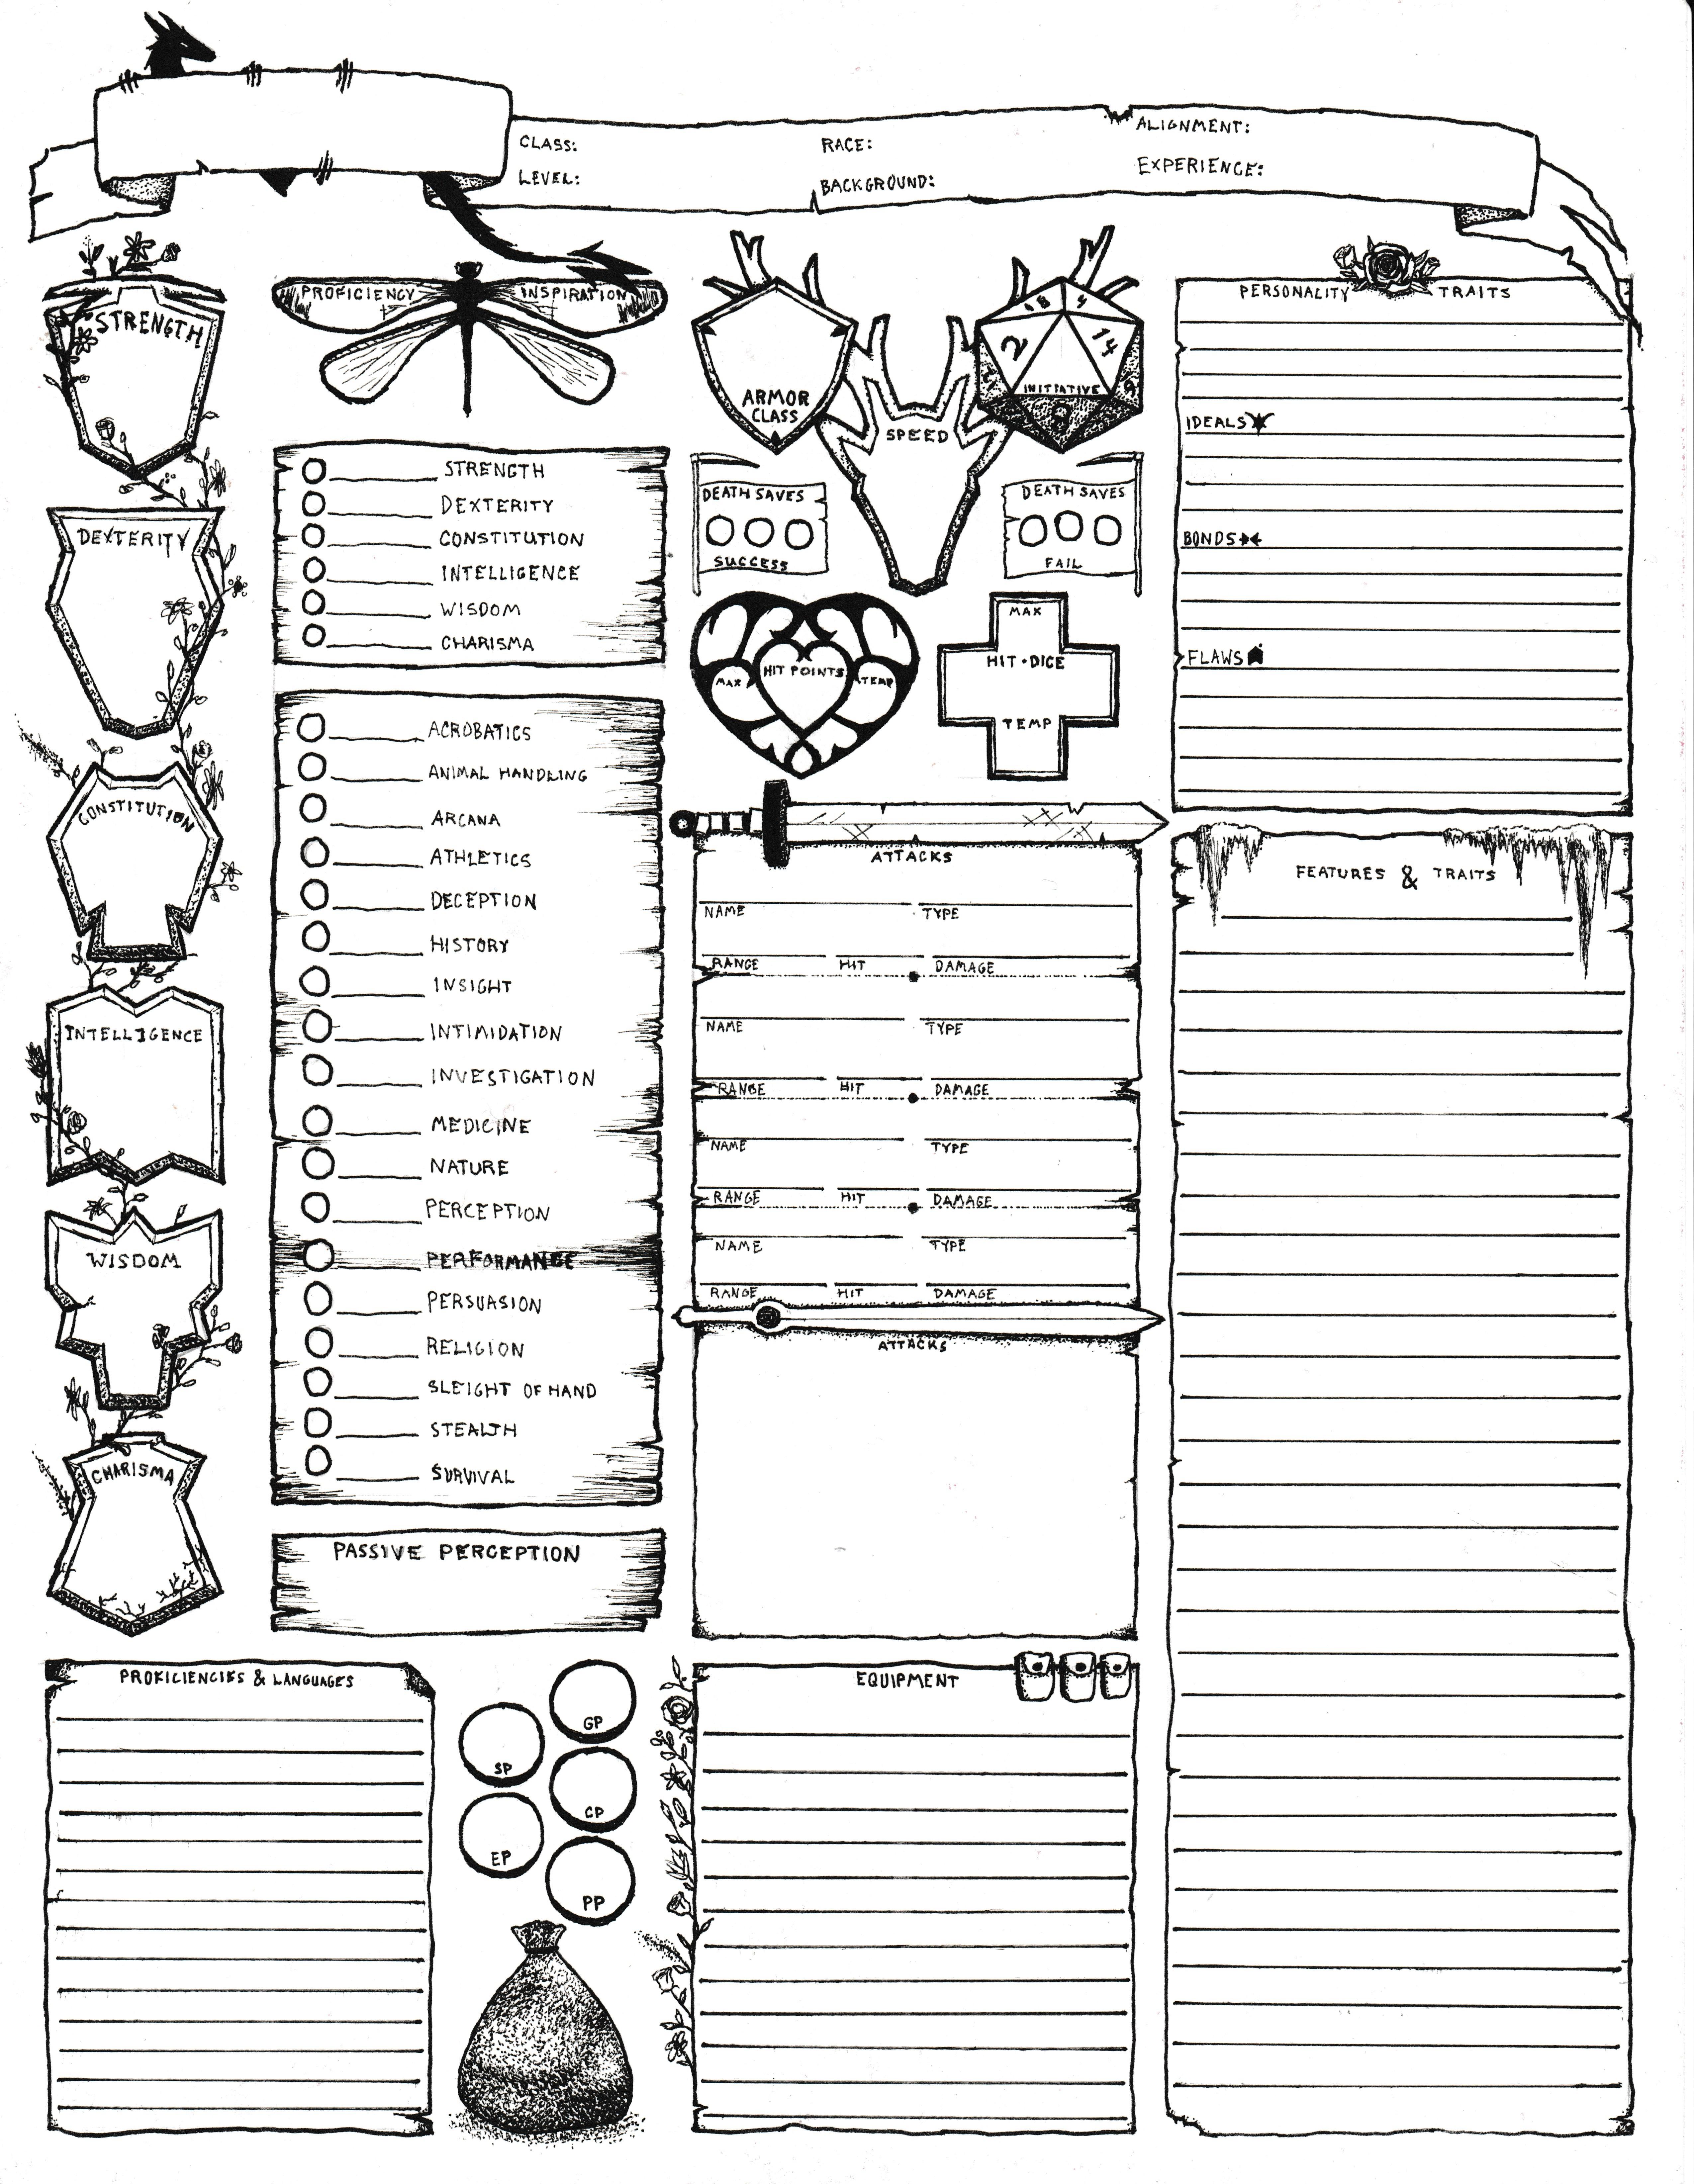 Character Sheet by /u/a-perture